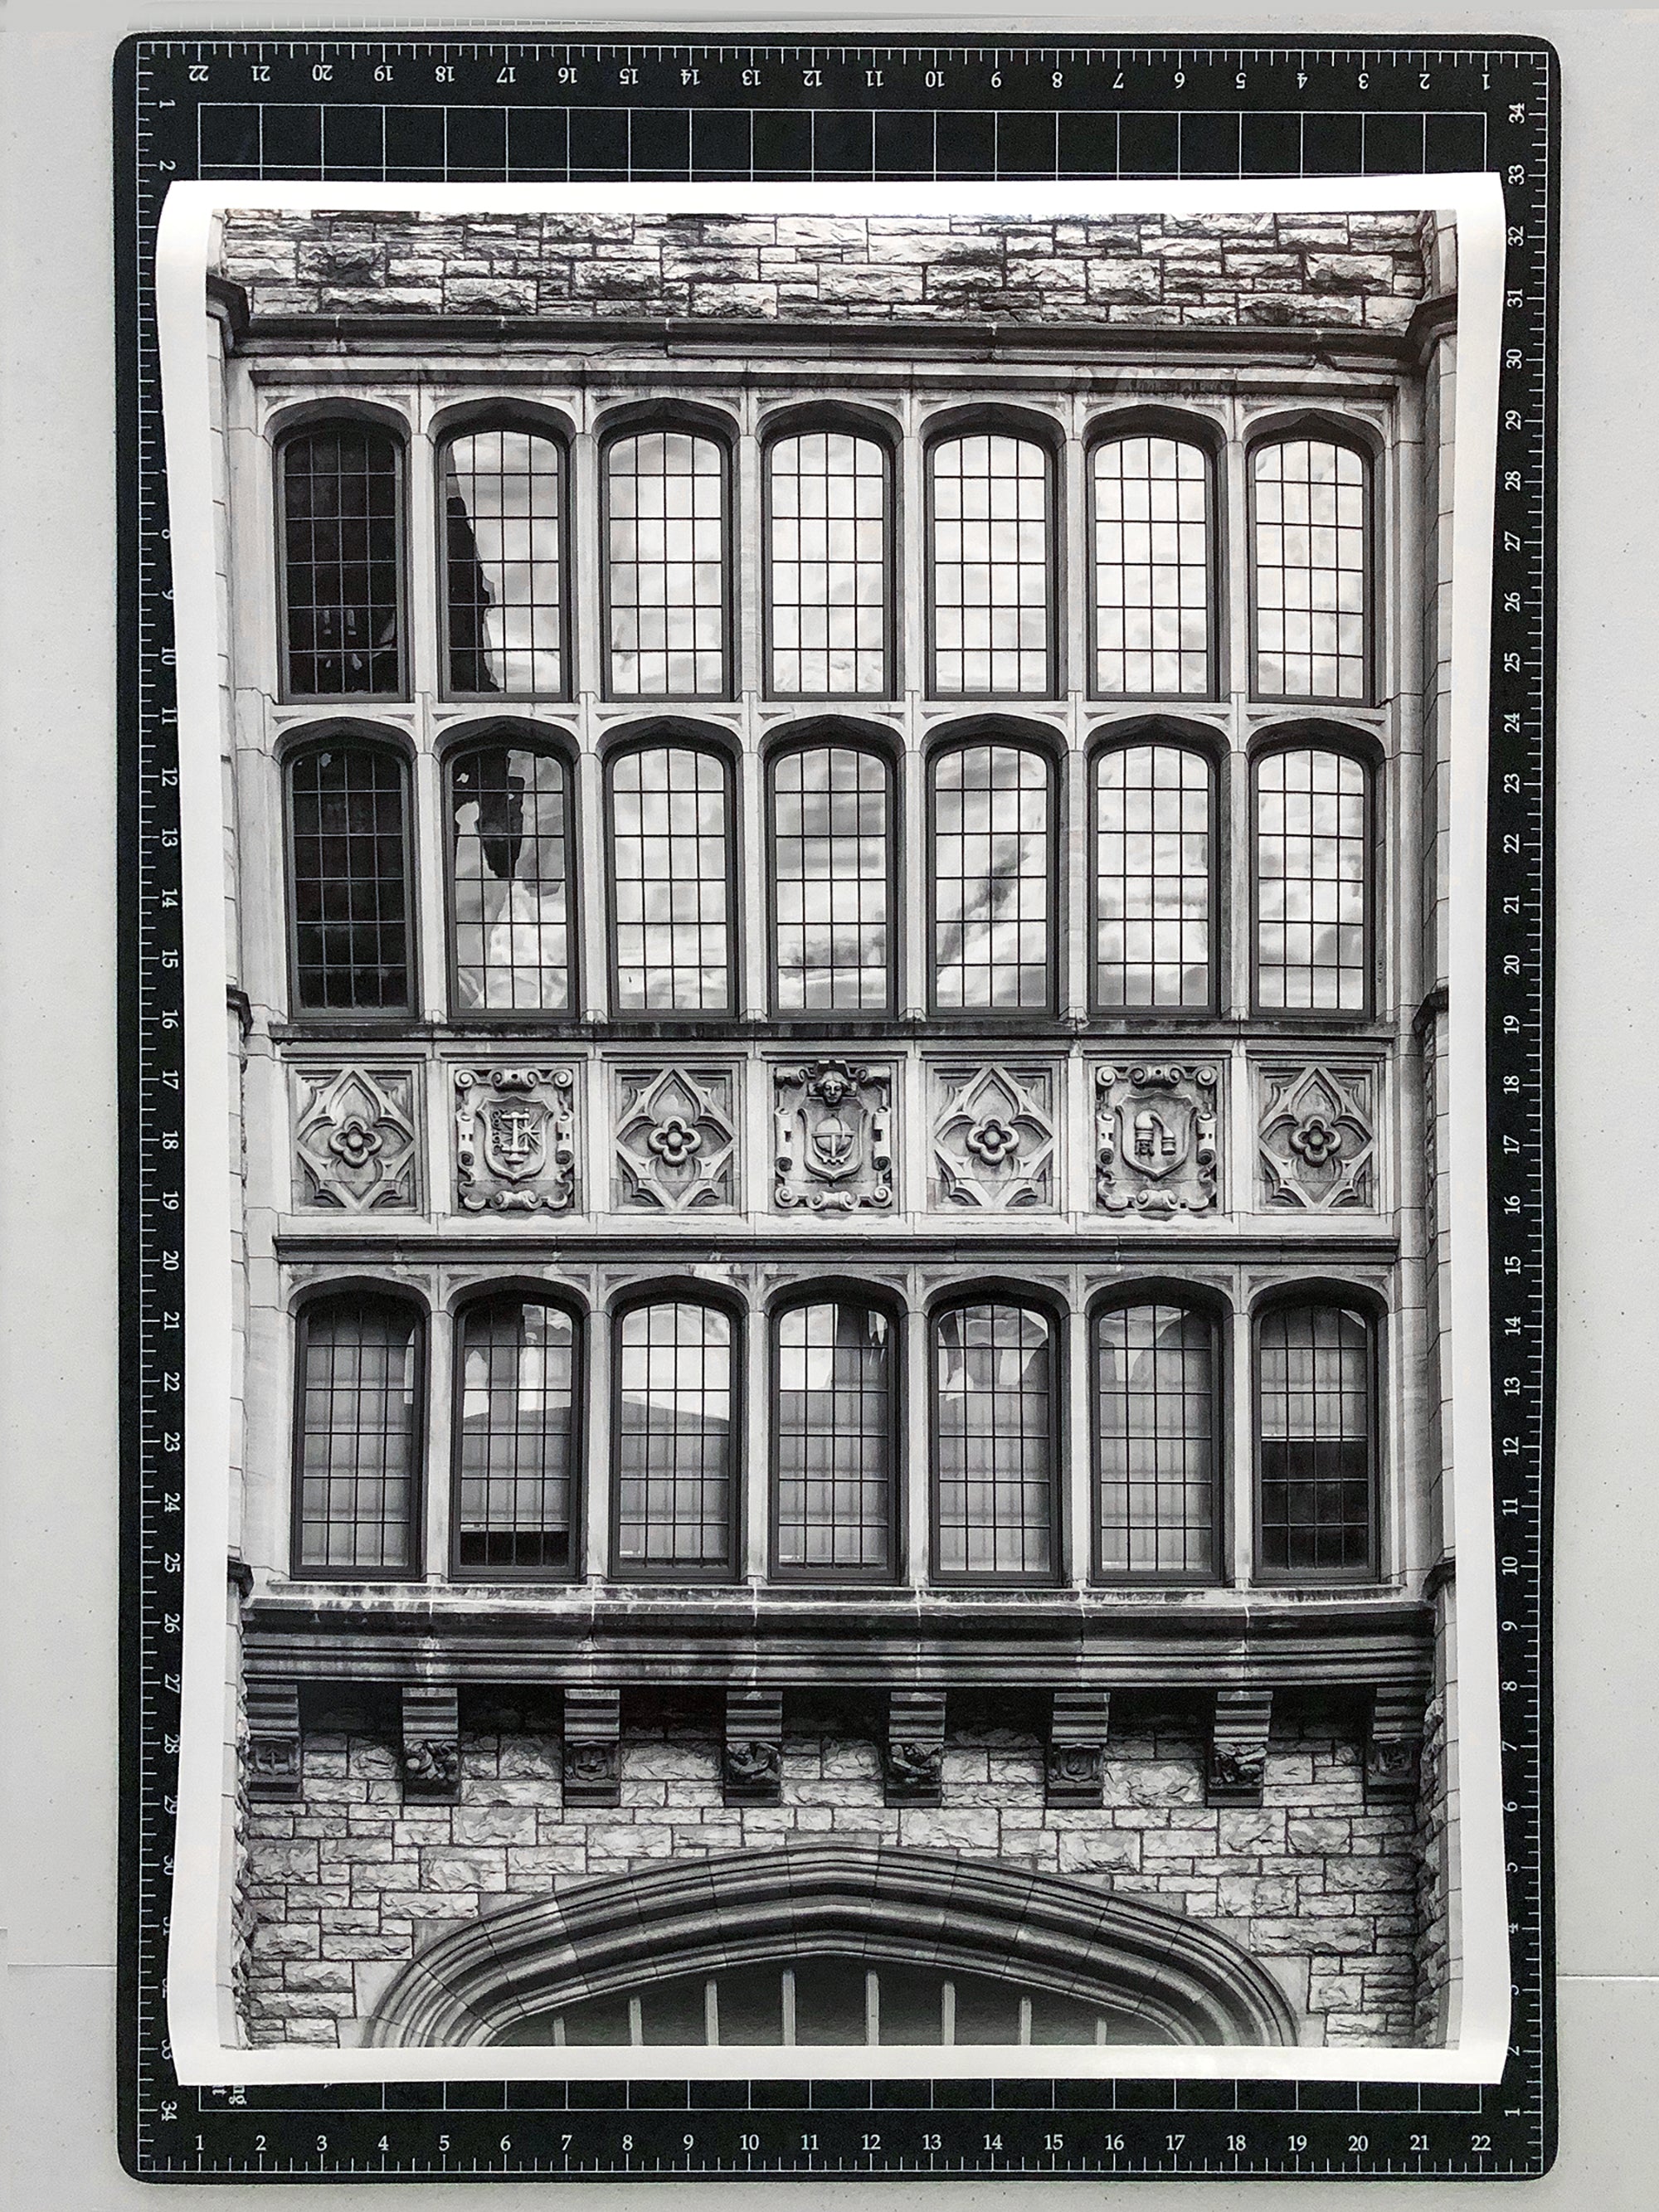 An overhead look at the 20 x 30-inch print of the Hume-Fogg Academy shown in the frame above.